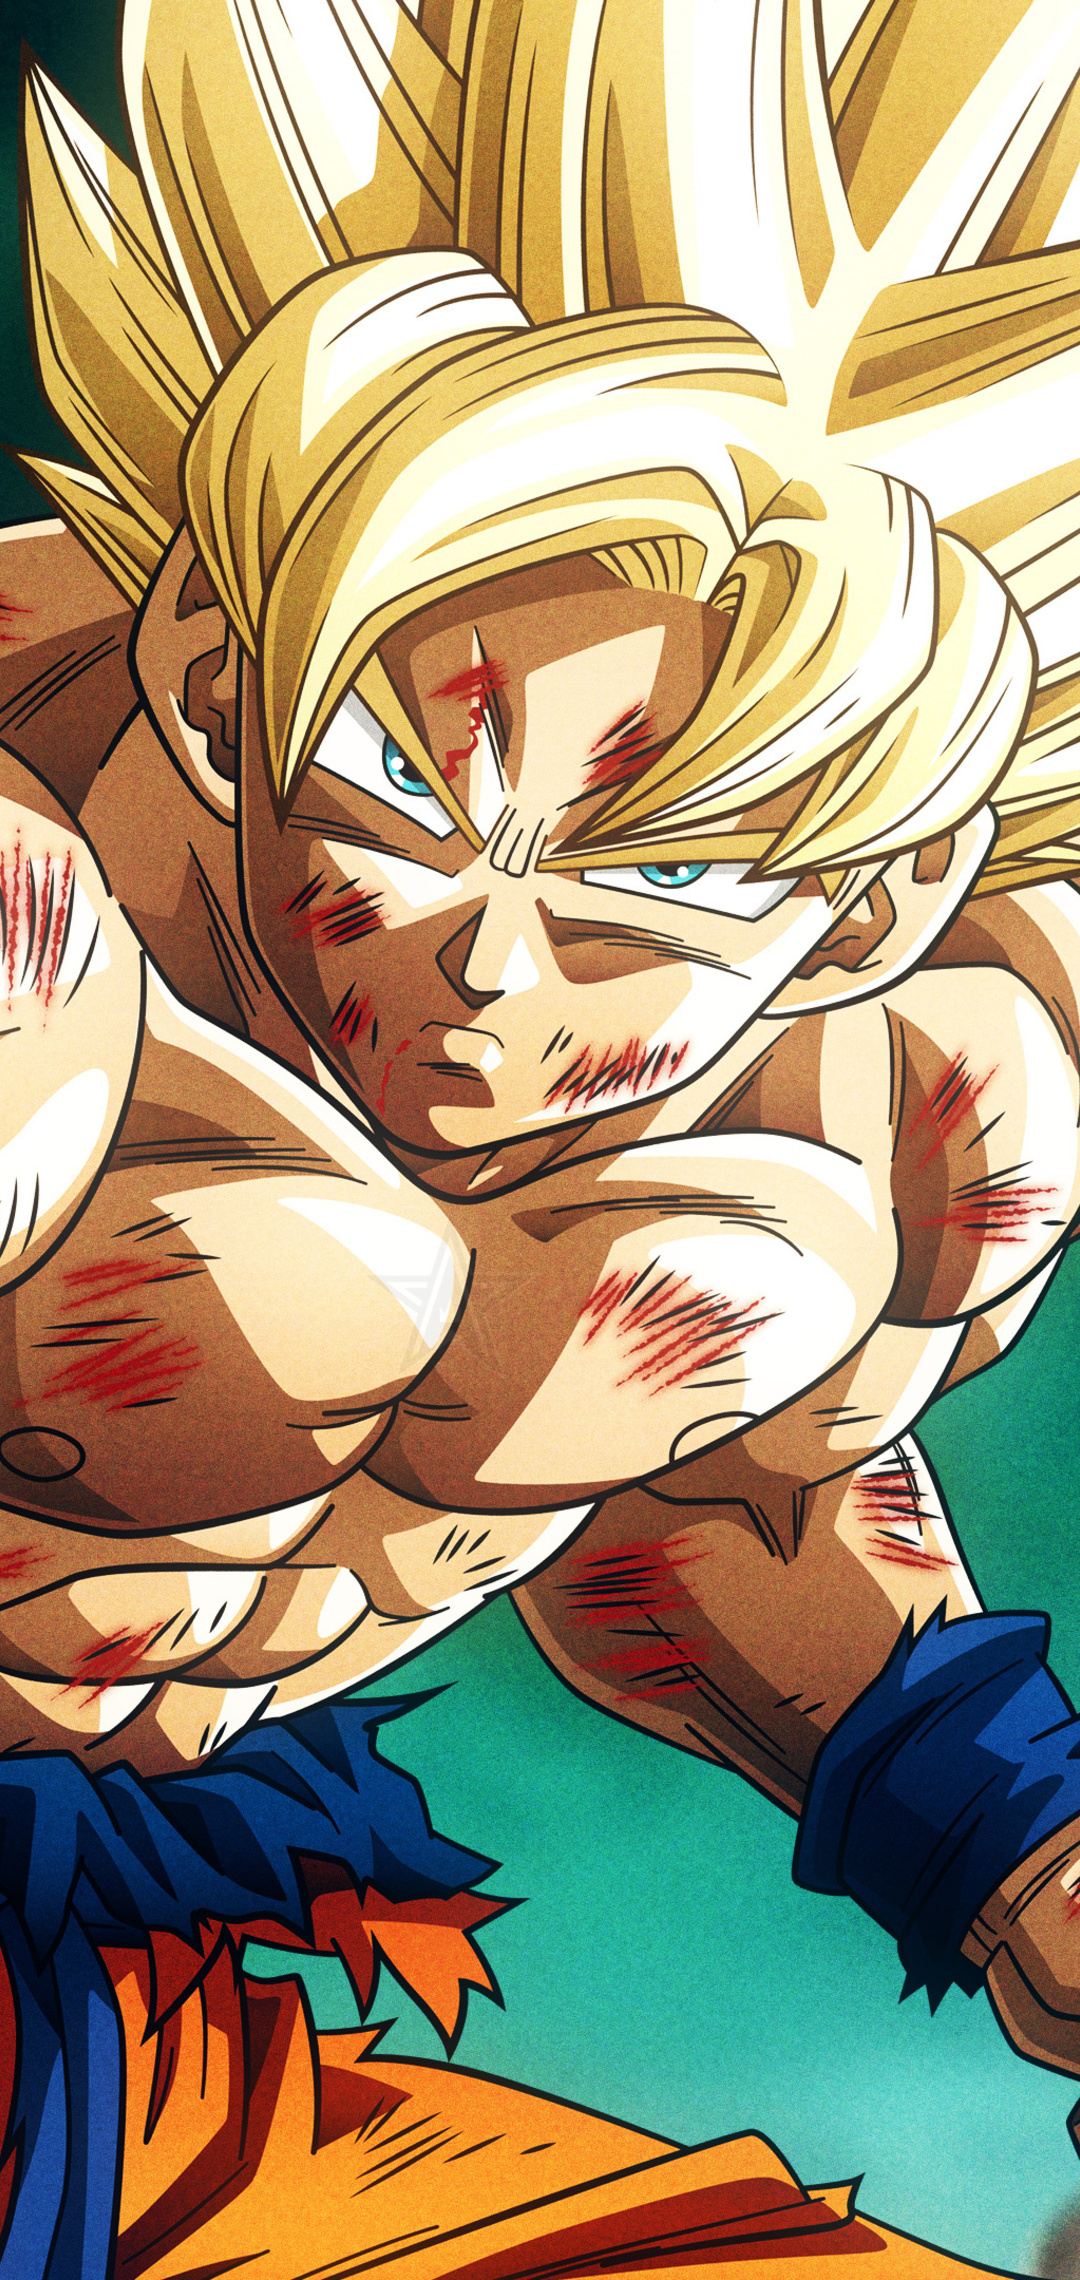 1080x2280 Super Saiyan Son Goku Dragon Ball Z 4k One Plus 6,Huawei  p20,Honor view 10,Vivo y85,Oppo f7,Xiaomi Mi A2 HD 4k Wallpapers, Images,  Backgrounds, Photos and Pictures